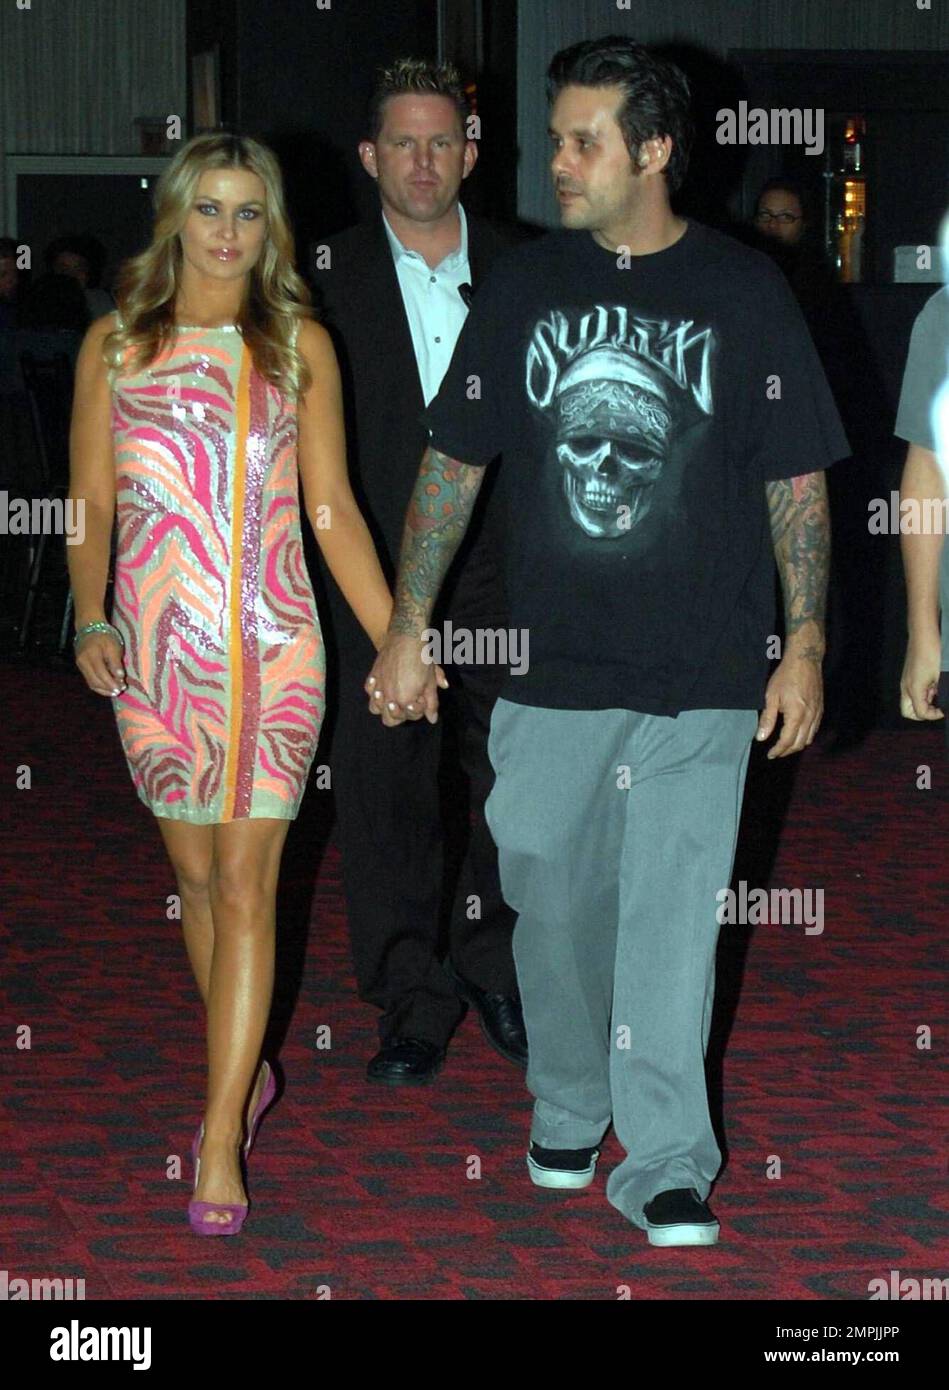 Former 'Baywatch' babe and star of the upcoming film 'Disaster Movie,' Carmen Electra hosts an evening at Prive Nightclub in Las Vegas, NV7/12/08. Stock Photo